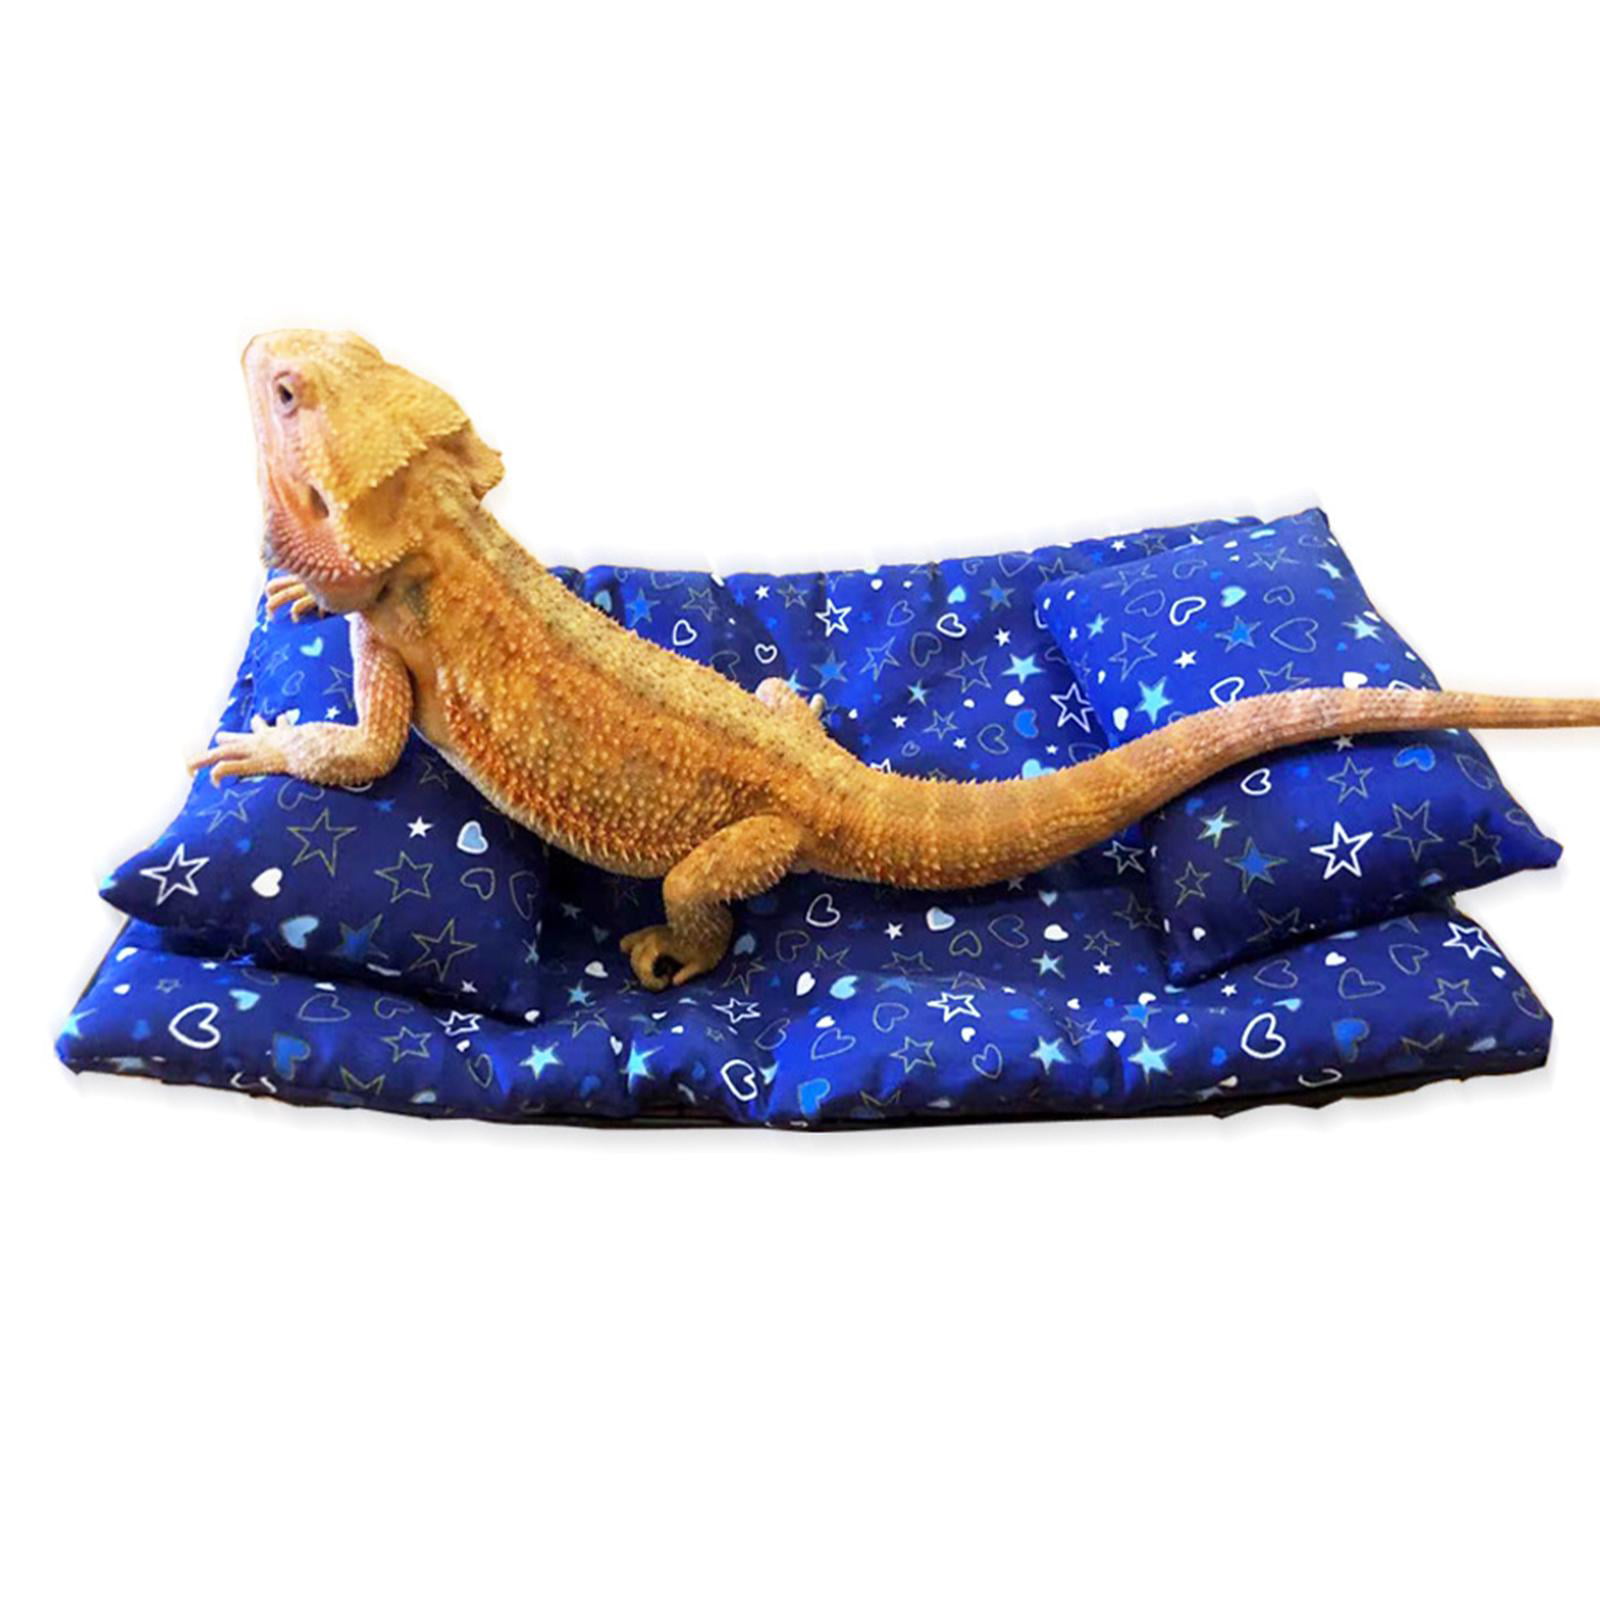 Adjustable Bearded Dragon Accessories Lizard Clothes Shark Costume Gift,Felt Reptile Outfits Decor for Chameleon Anole Green Iguanas Leopard Gecko Amphibians Small Animals Pet Supplies Toy 